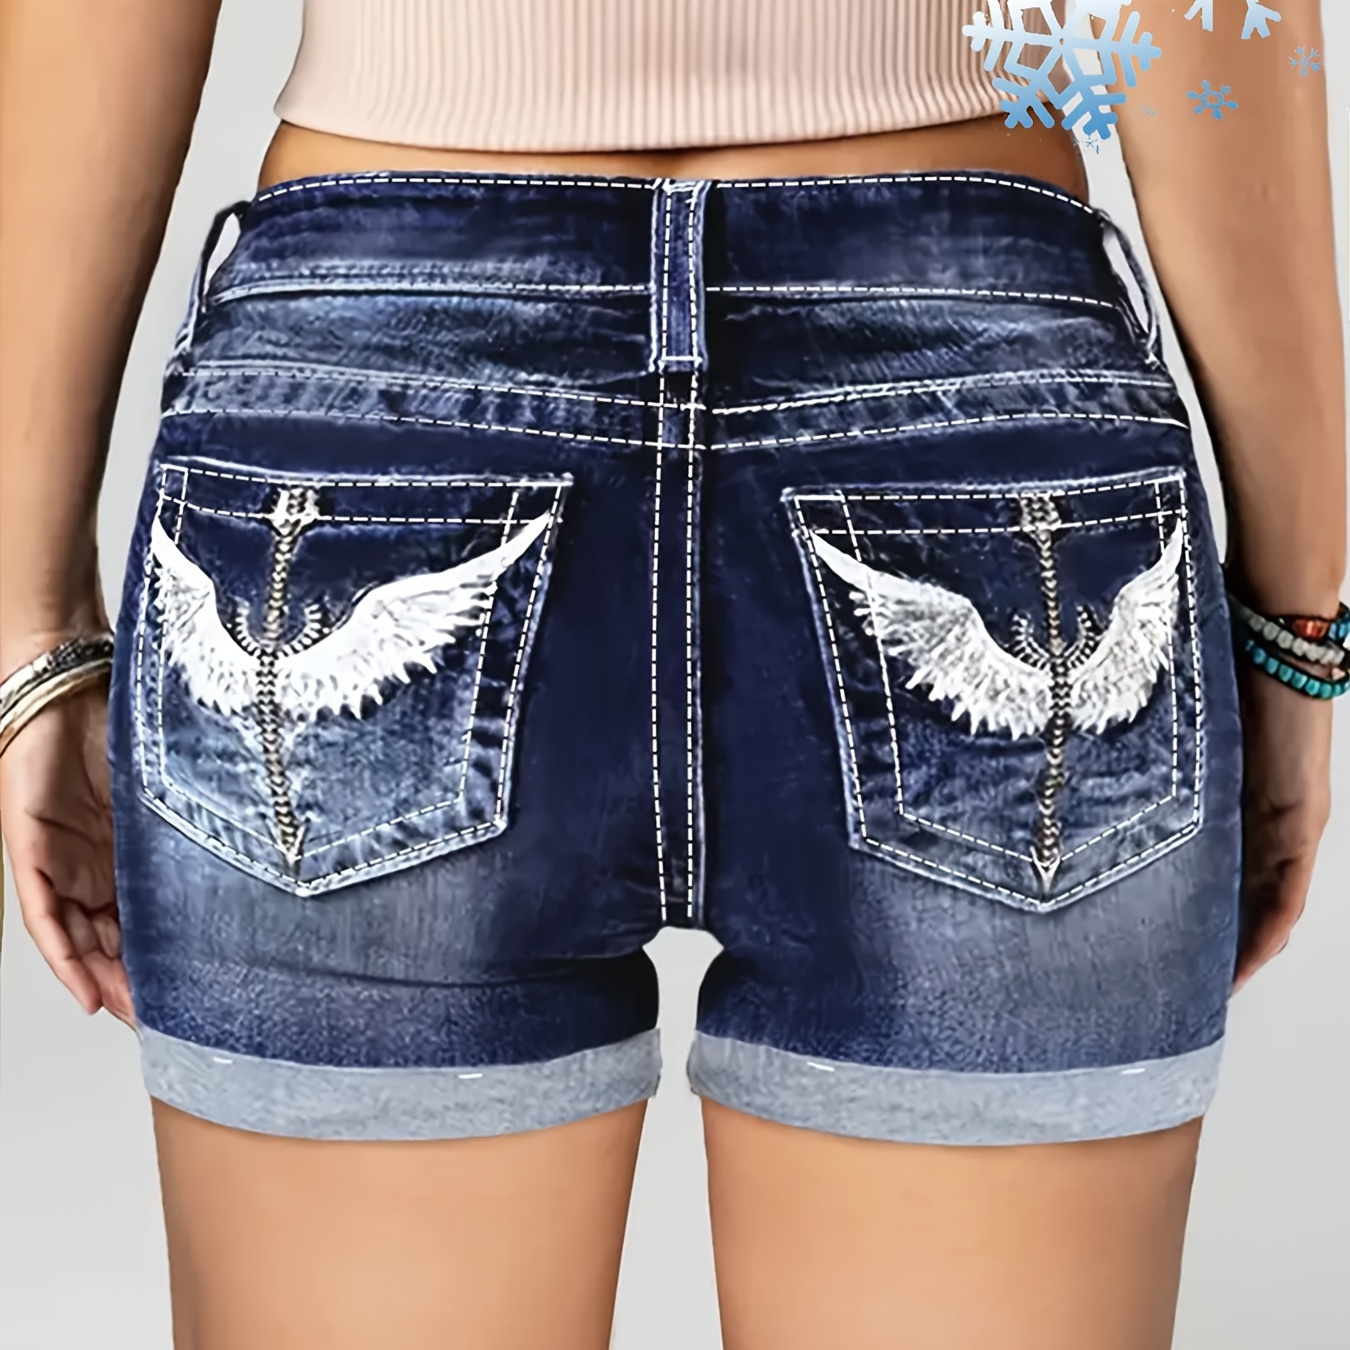 

Women's Plus Size Whiskering Denim Shorts With Wing Embroidery, Rolled Hem, Slim Fit, Retro Style, Stretchy Casual Jean Shorts